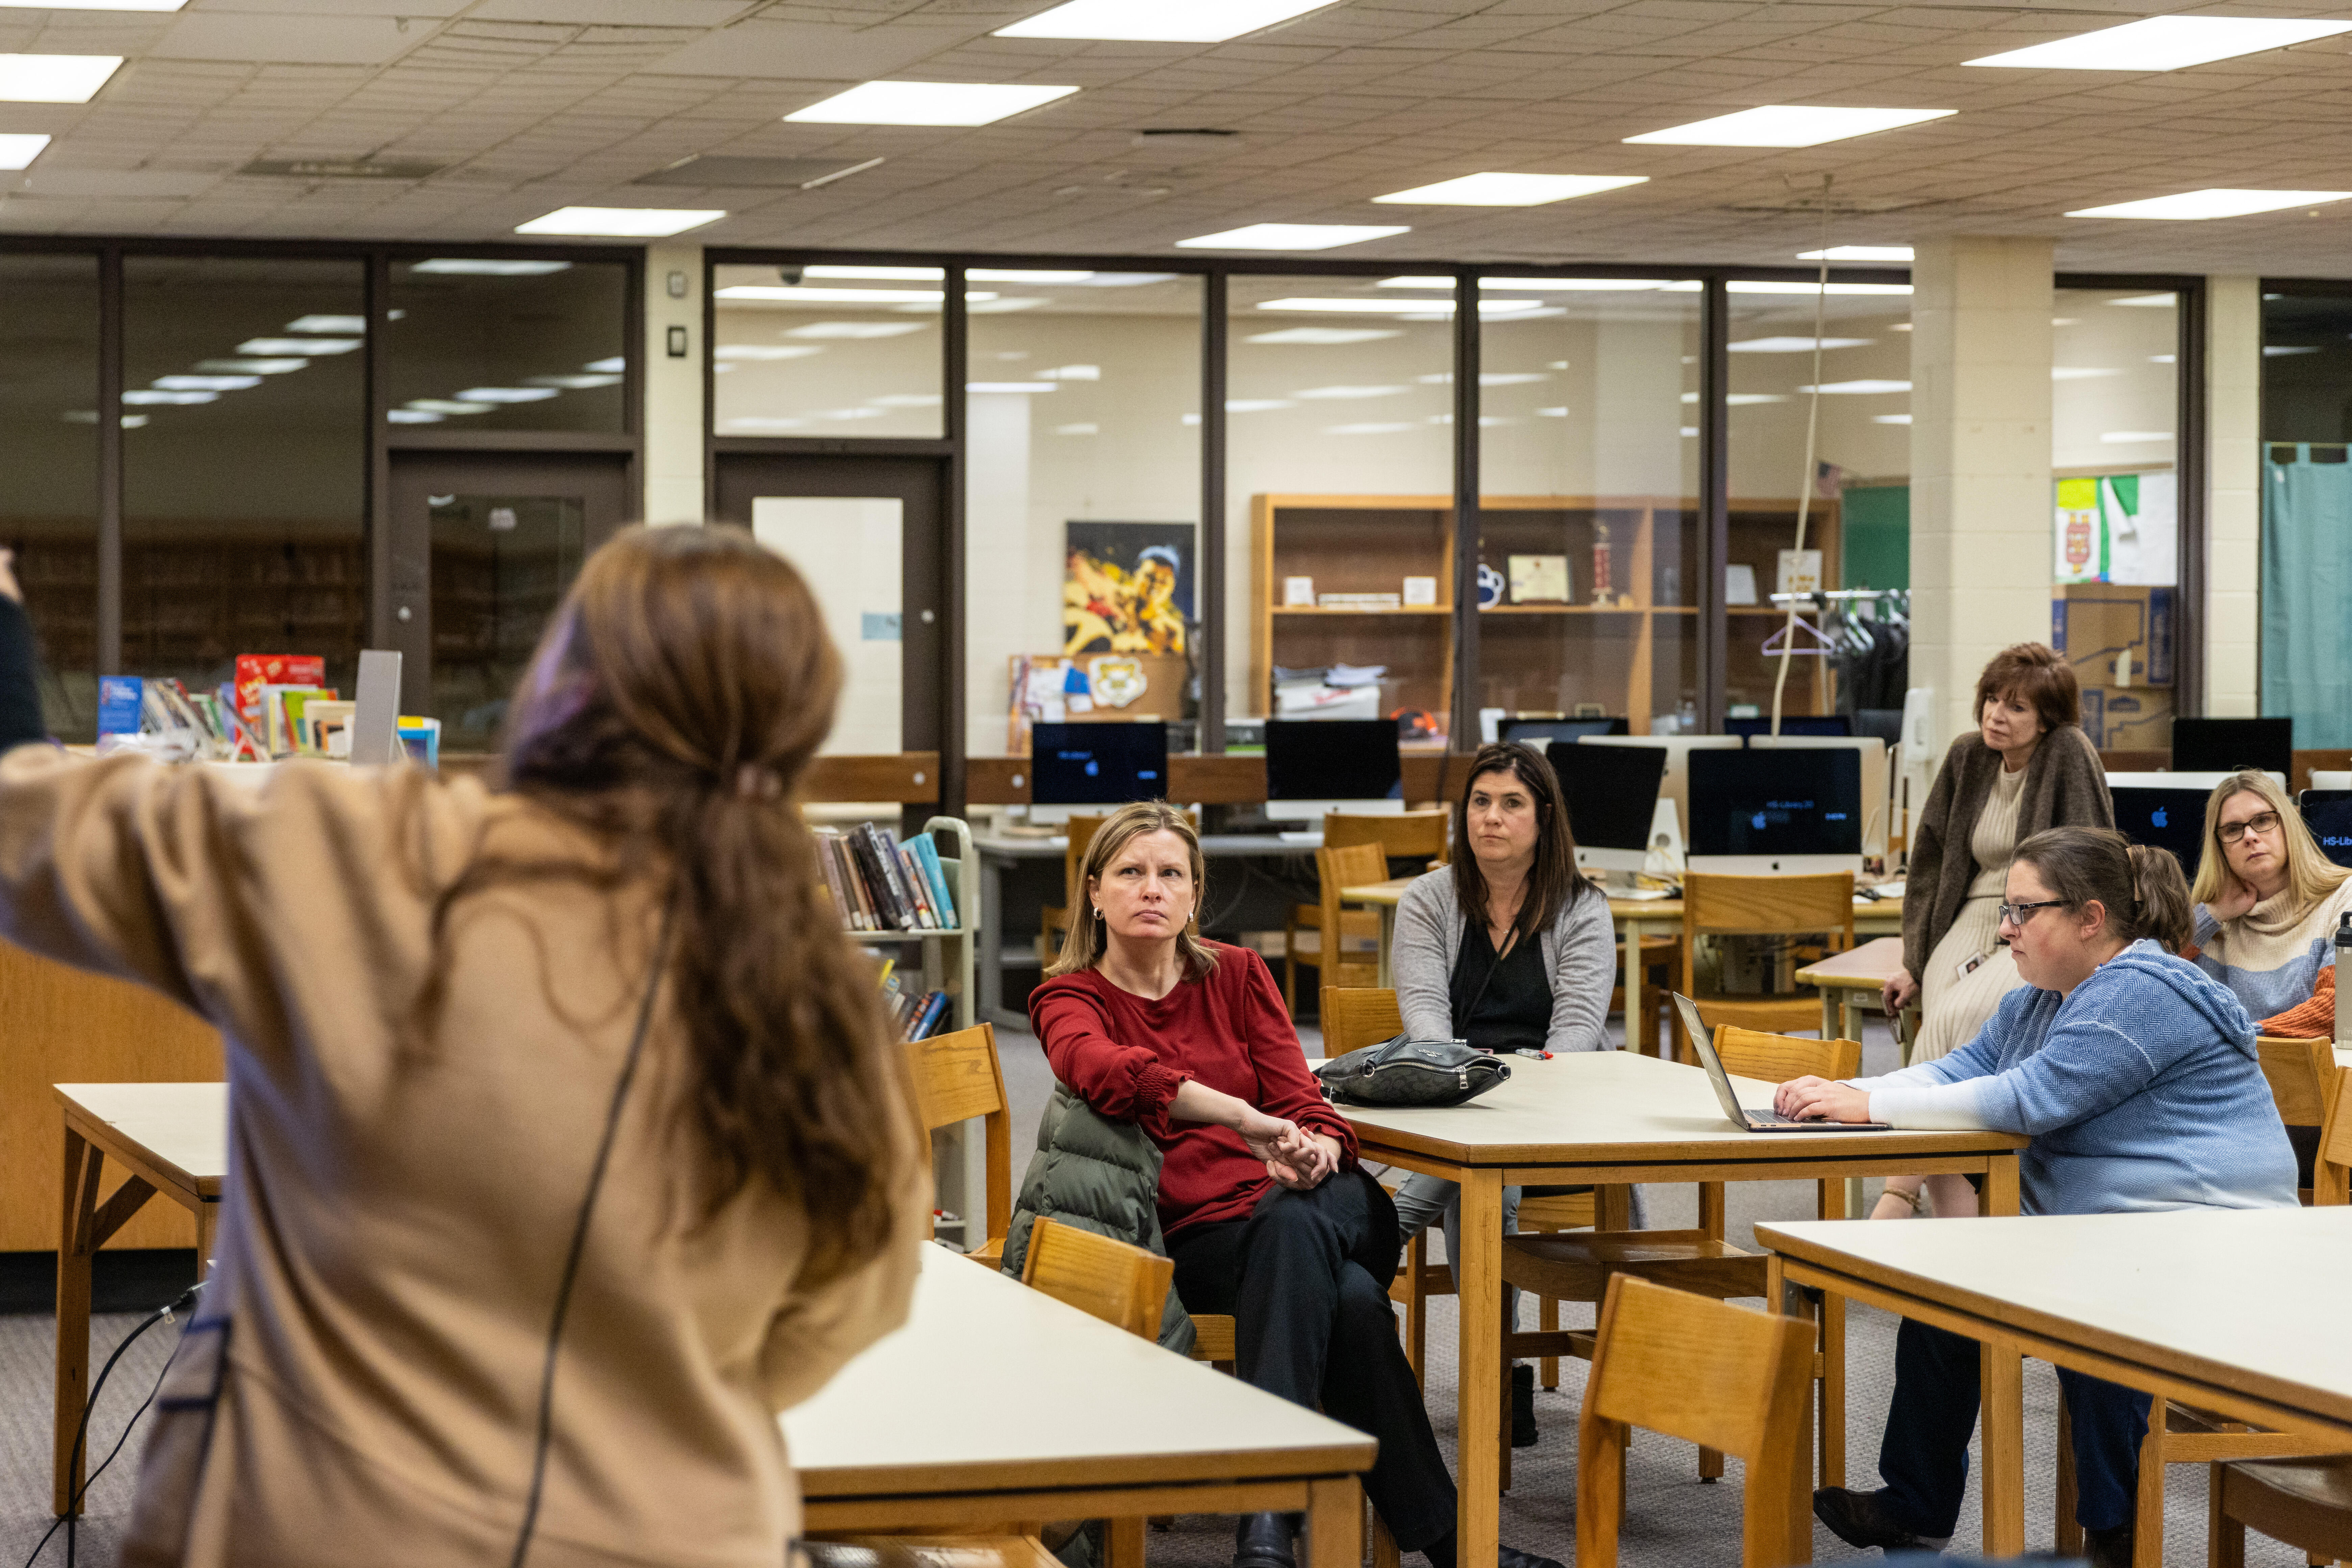 A woman stands at a digital screen and gestures while talking to an audience in a school library